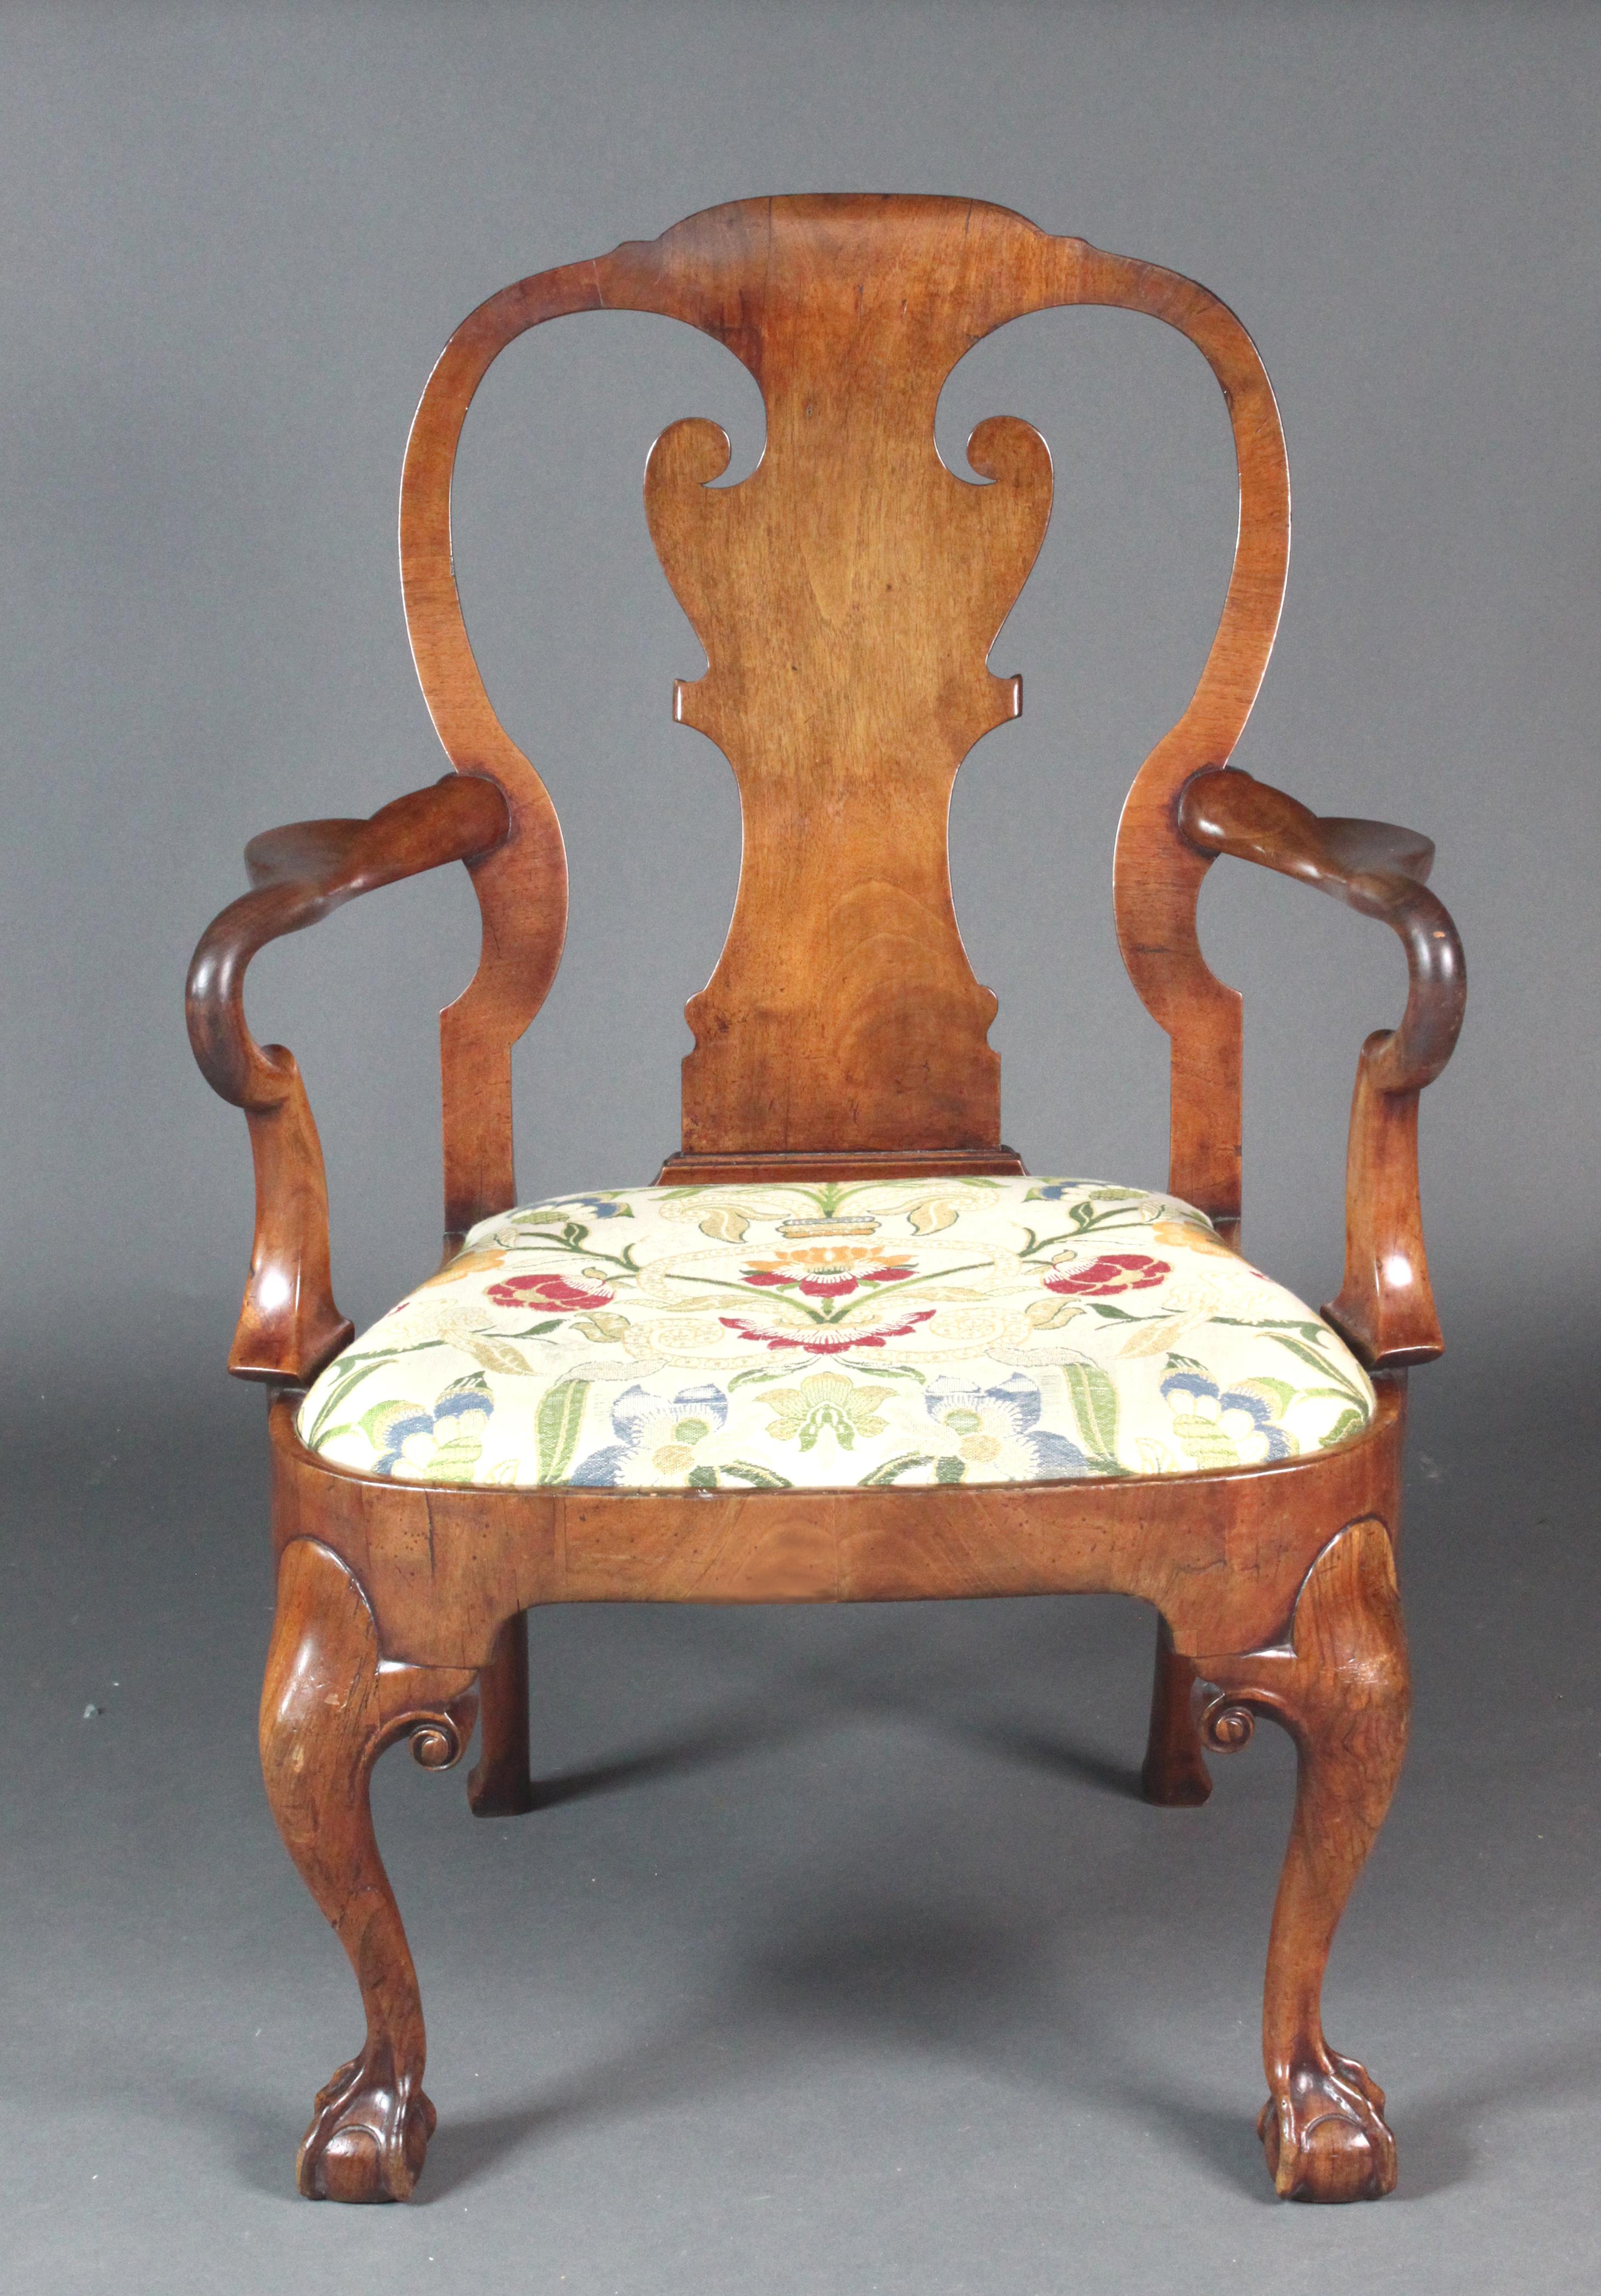 An early 18th Century veneered walnut arm chair on winged cabriole legs with claw feet, shepherd's crook arms and a handsome shaped back splat. Good generous size, original condition with one old repair to one of the legs.